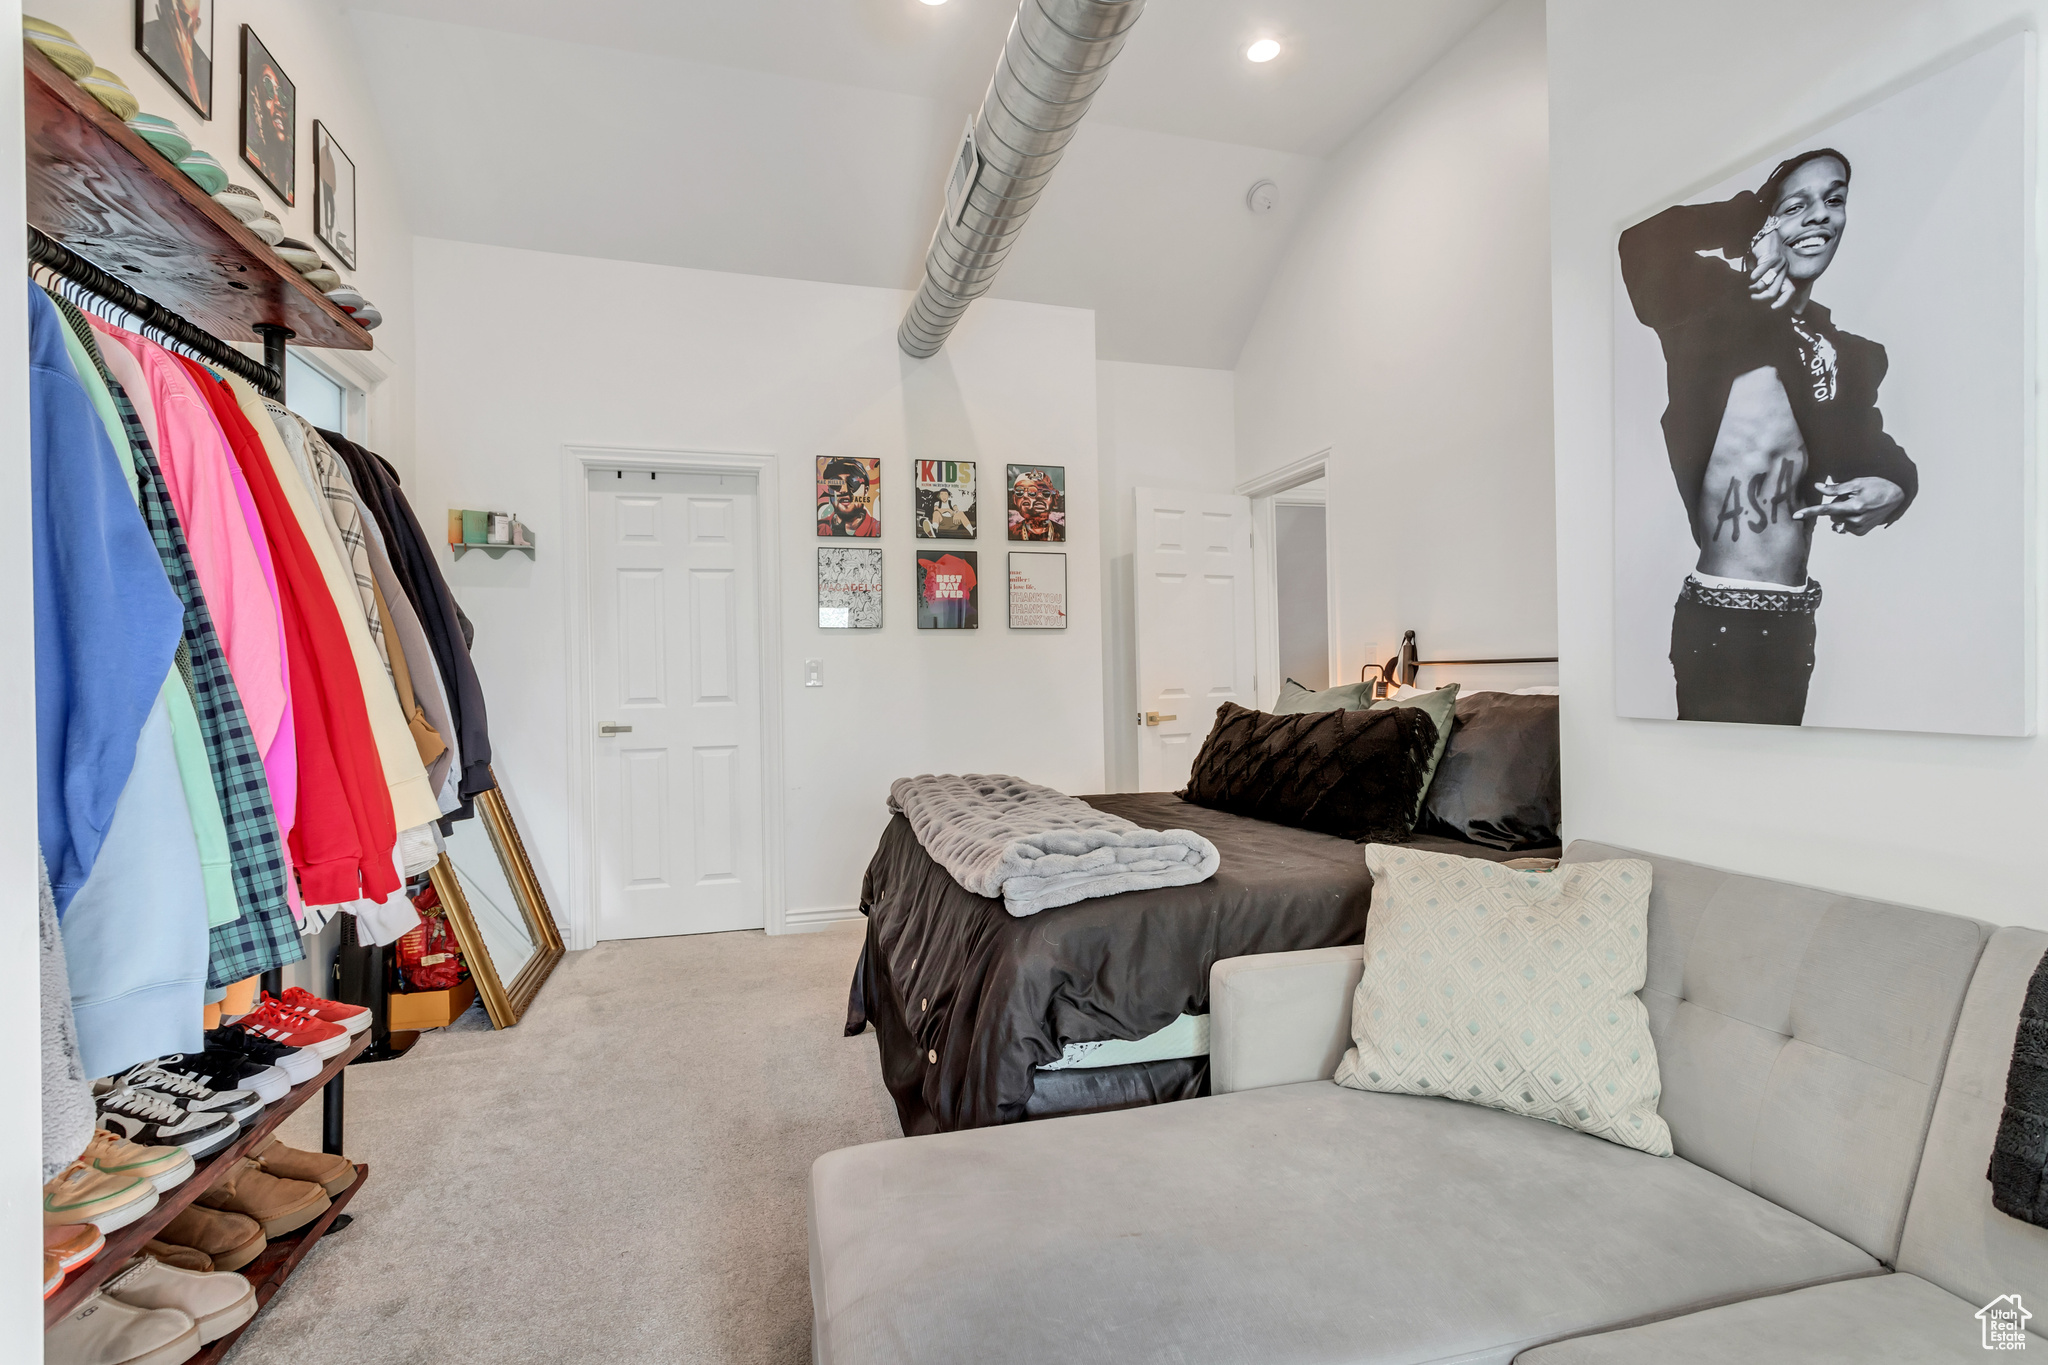 Striking vaulted ceilings, lots of windows and a private sitting area, walk-in closet and ensuite bath make this second floor bedroom a true oasis